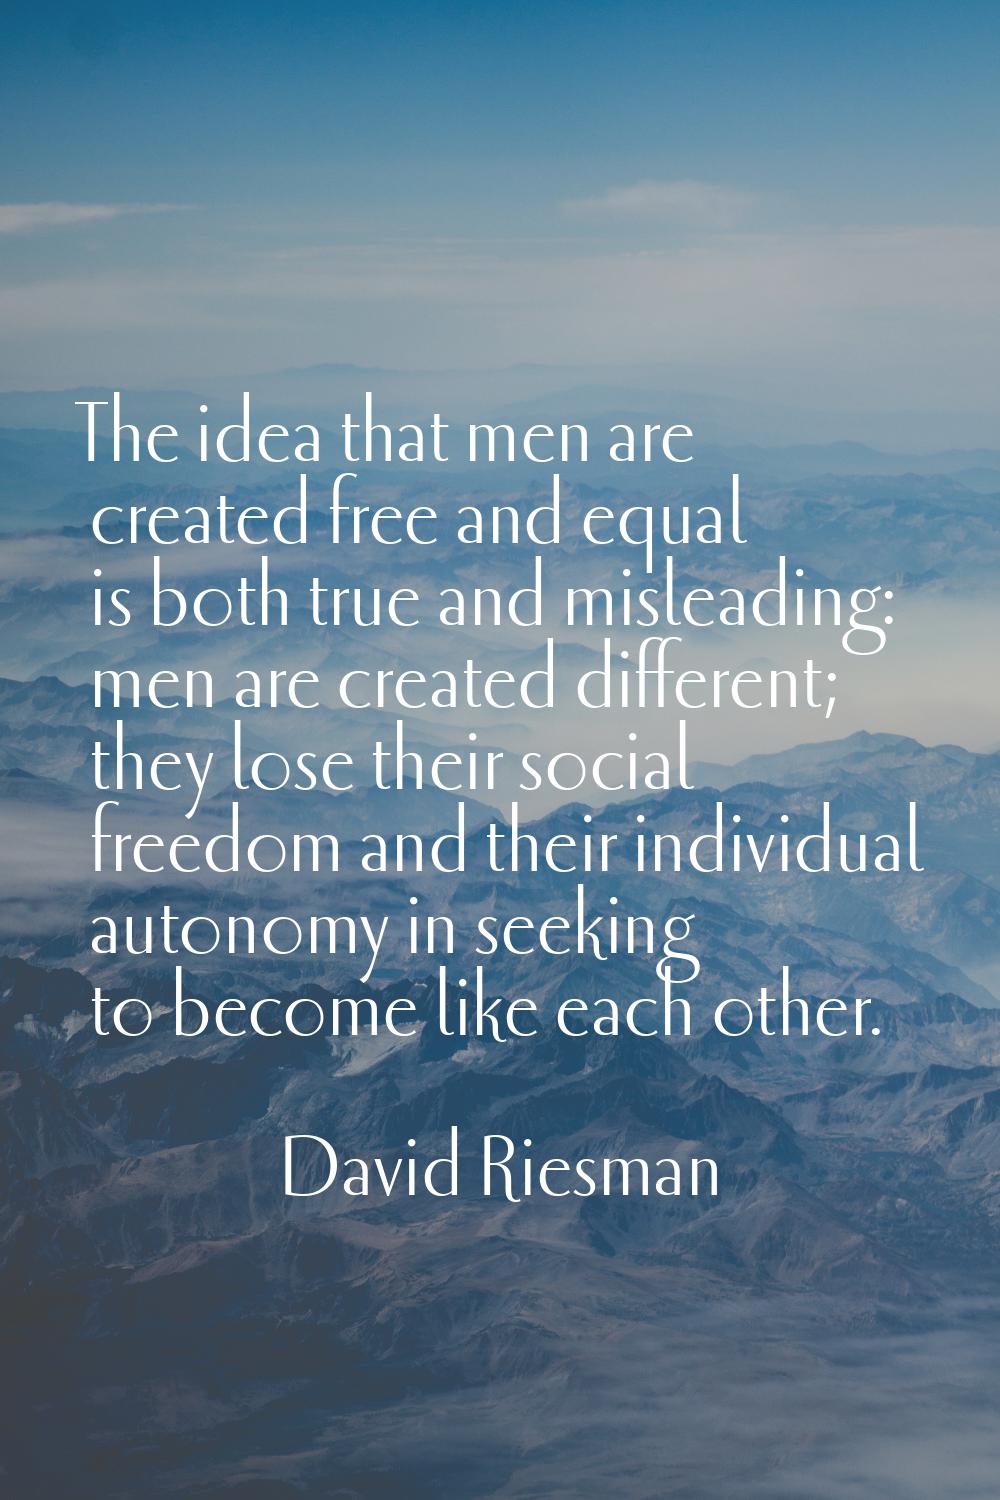 The idea that men are created free and equal is both true and misleading: men are created different